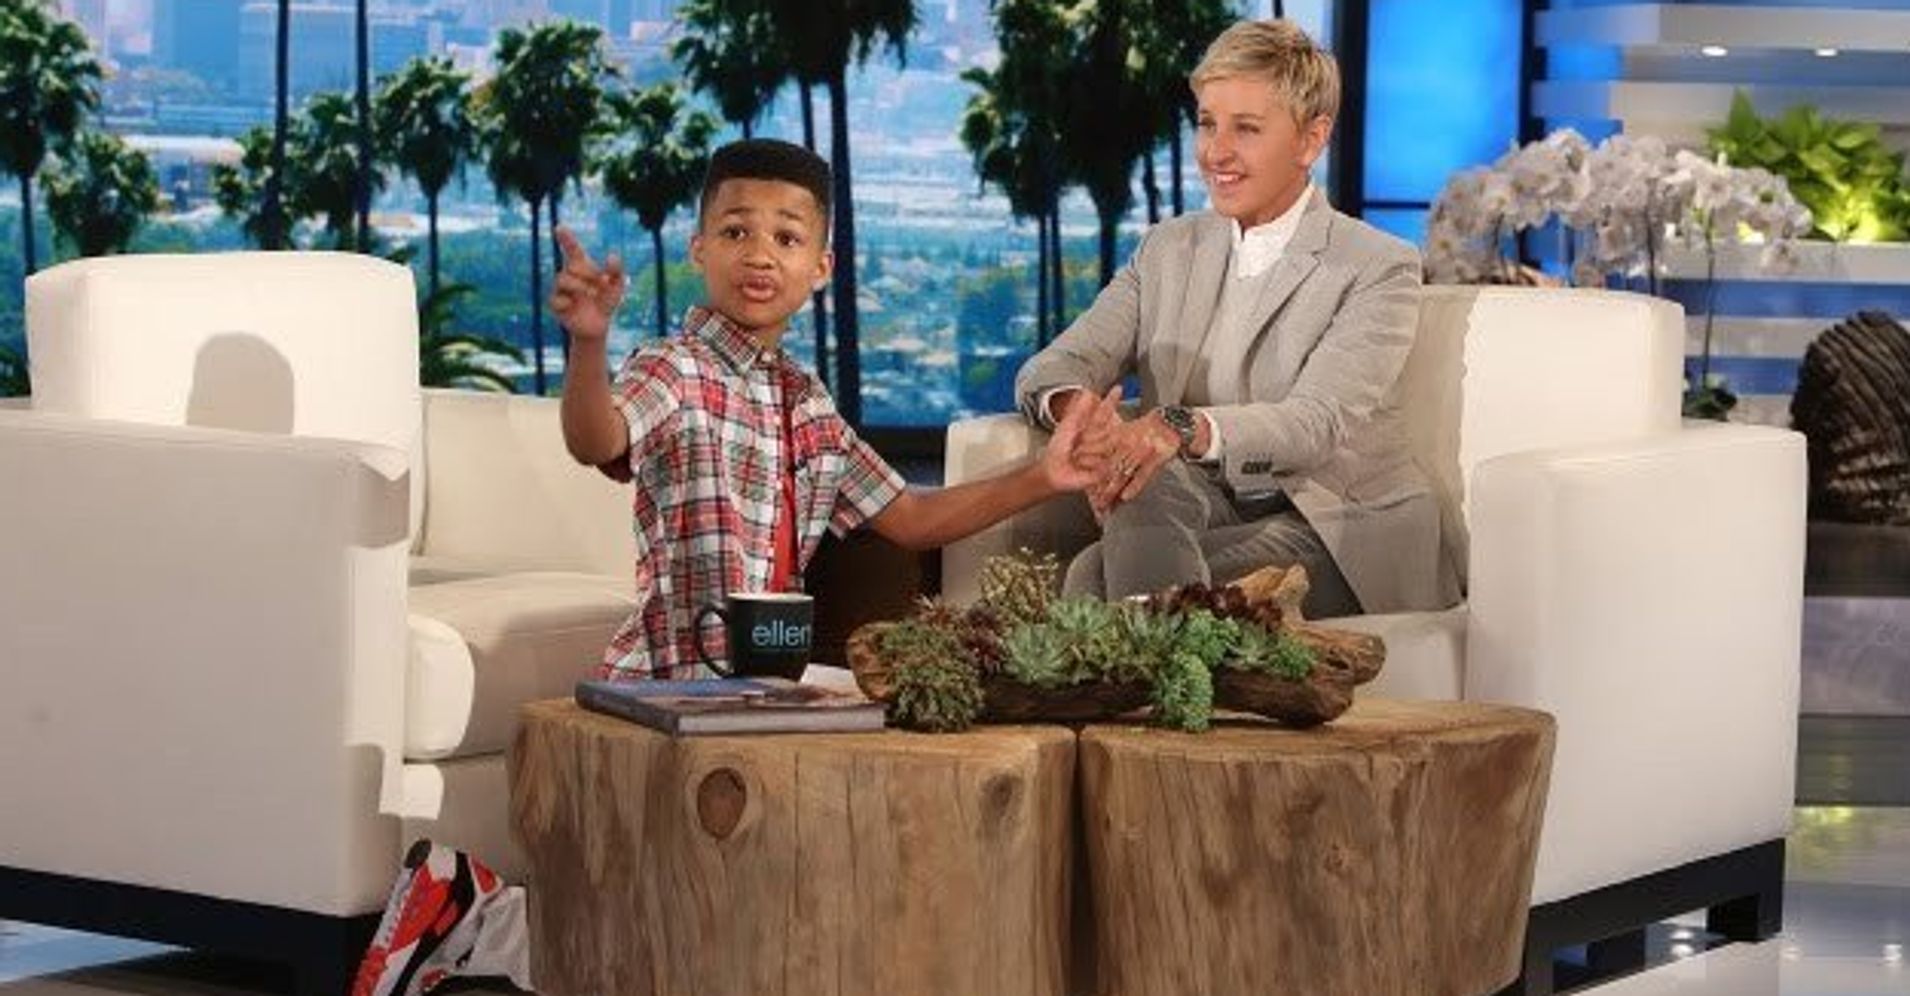 These Were The Cutest Kids On 'The Ellen DeGeneres Show' This Season